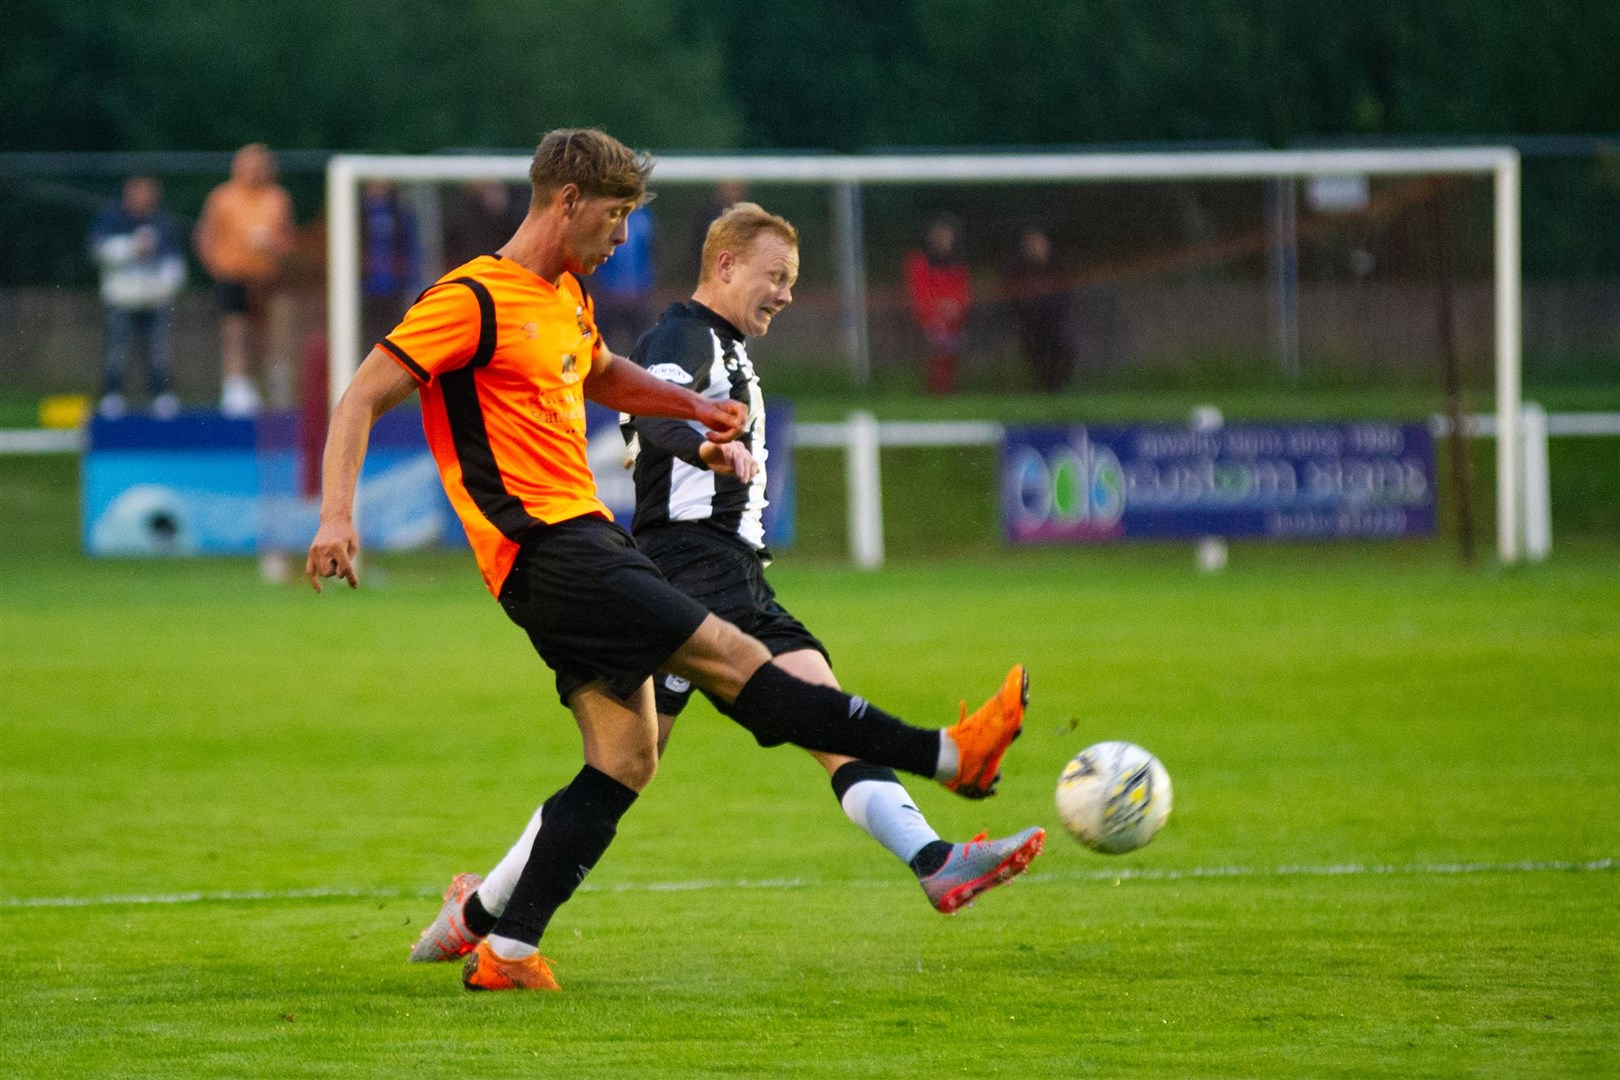 Ally Mackenzie is an injury concern for Rothes. Picture: Daniel Forsyth....